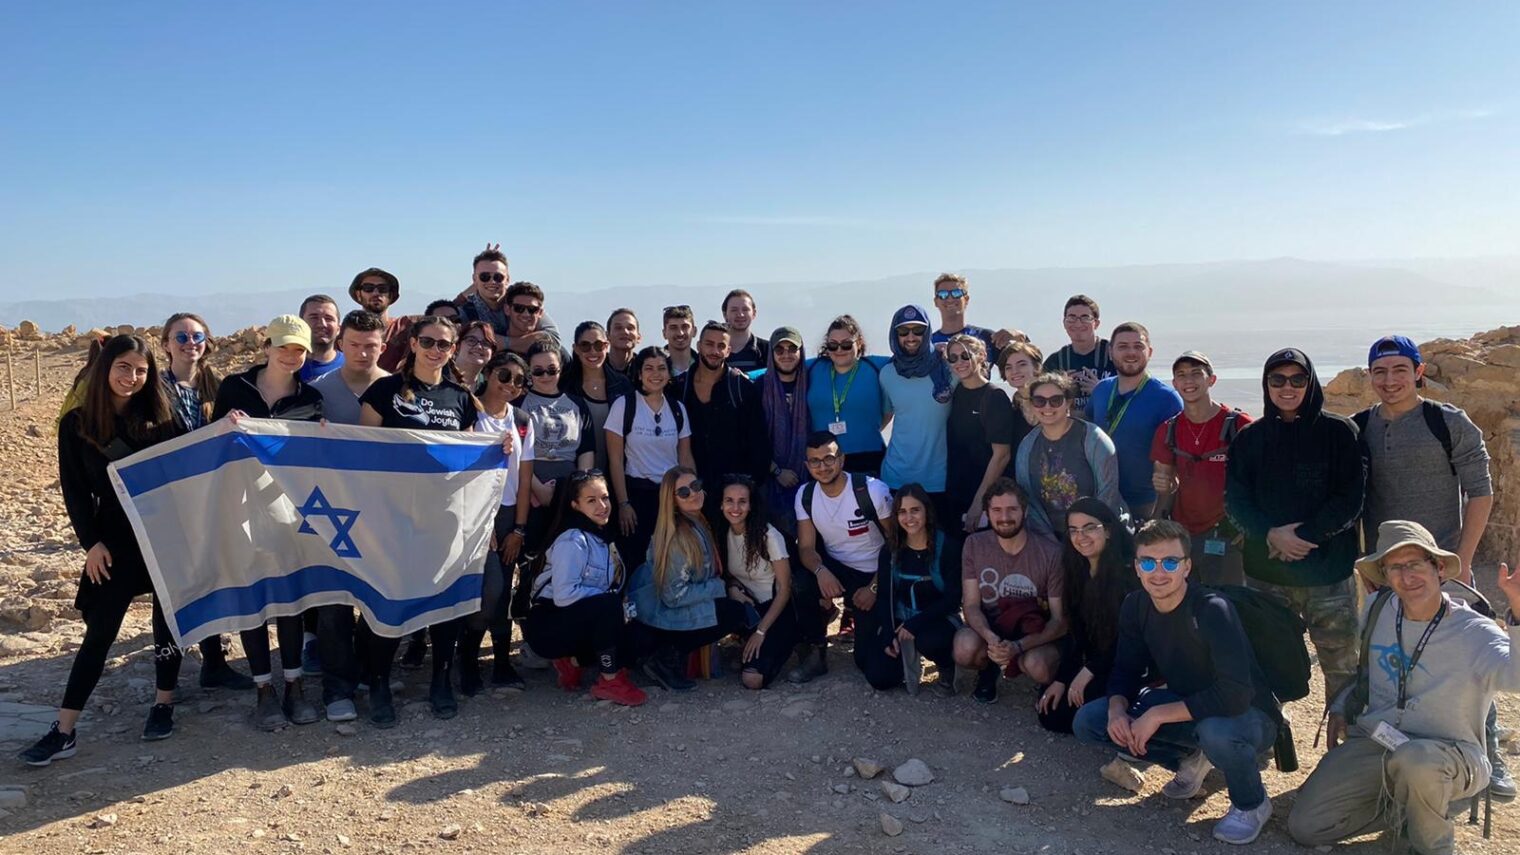 Rachel Poulin co-staffed a Birthright trip at the end of December 2019 into January 2020, here shown in the Negev Desert. Photo: courtesy